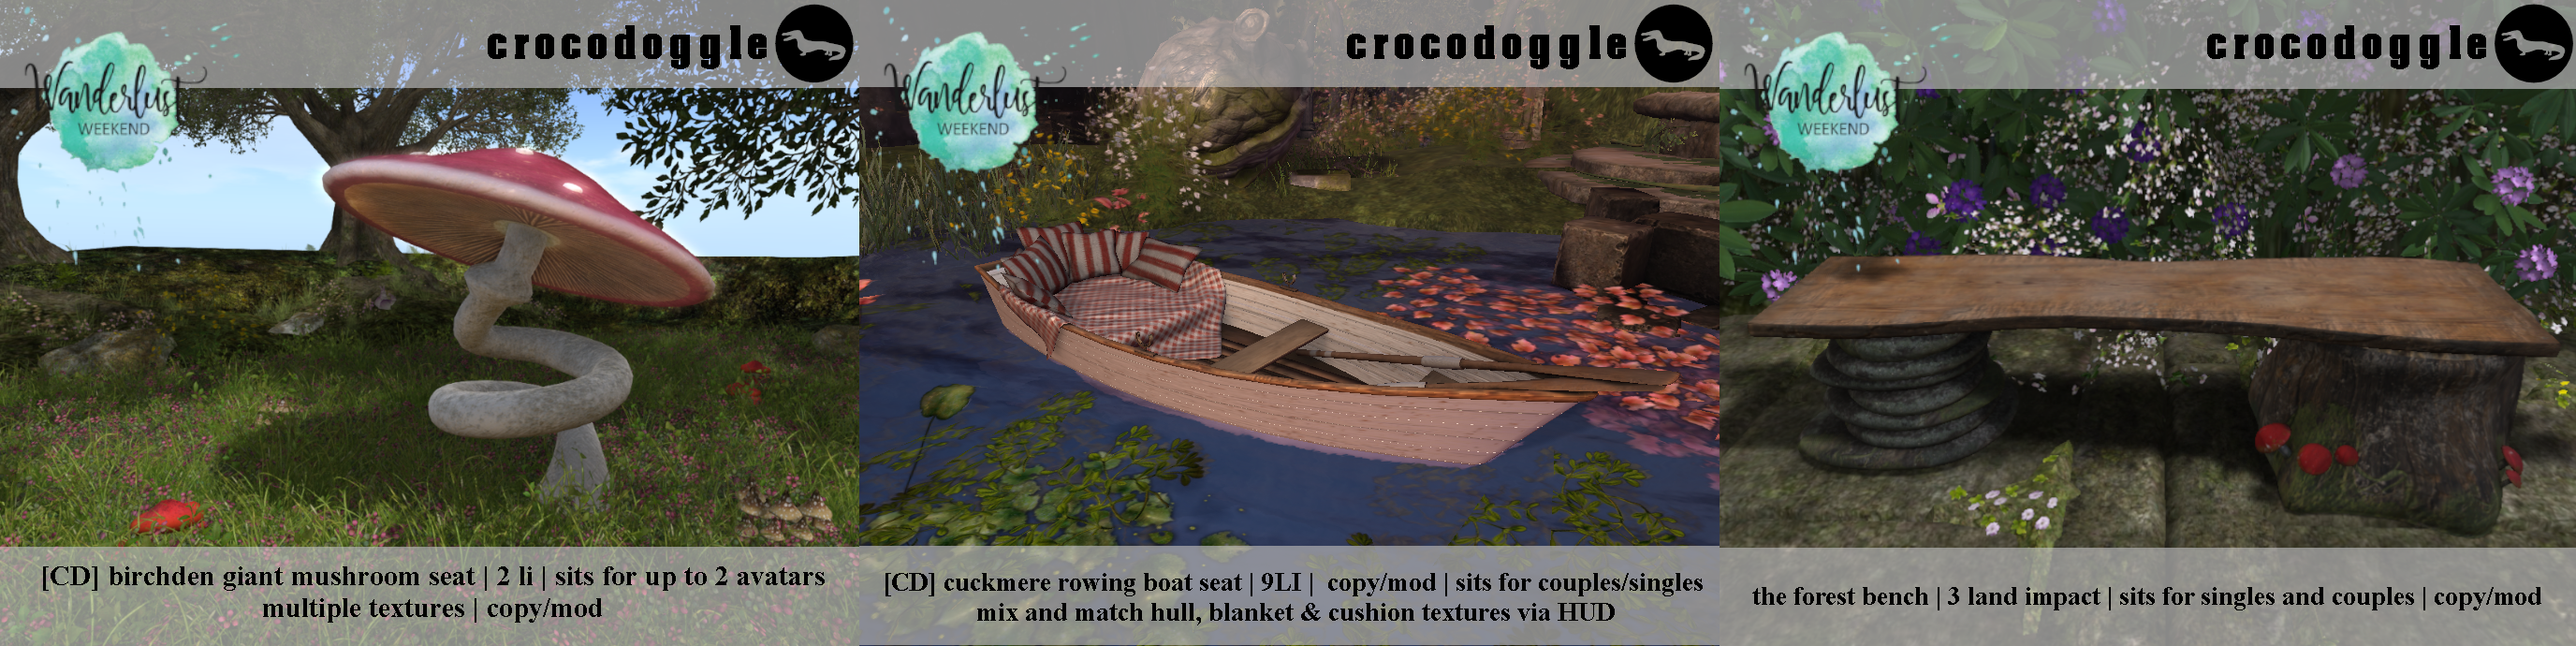 Crocodoggle – Birchden Giant Mushroom Seat, Cuckmere Rowing Boat Seat, & Forest Bench